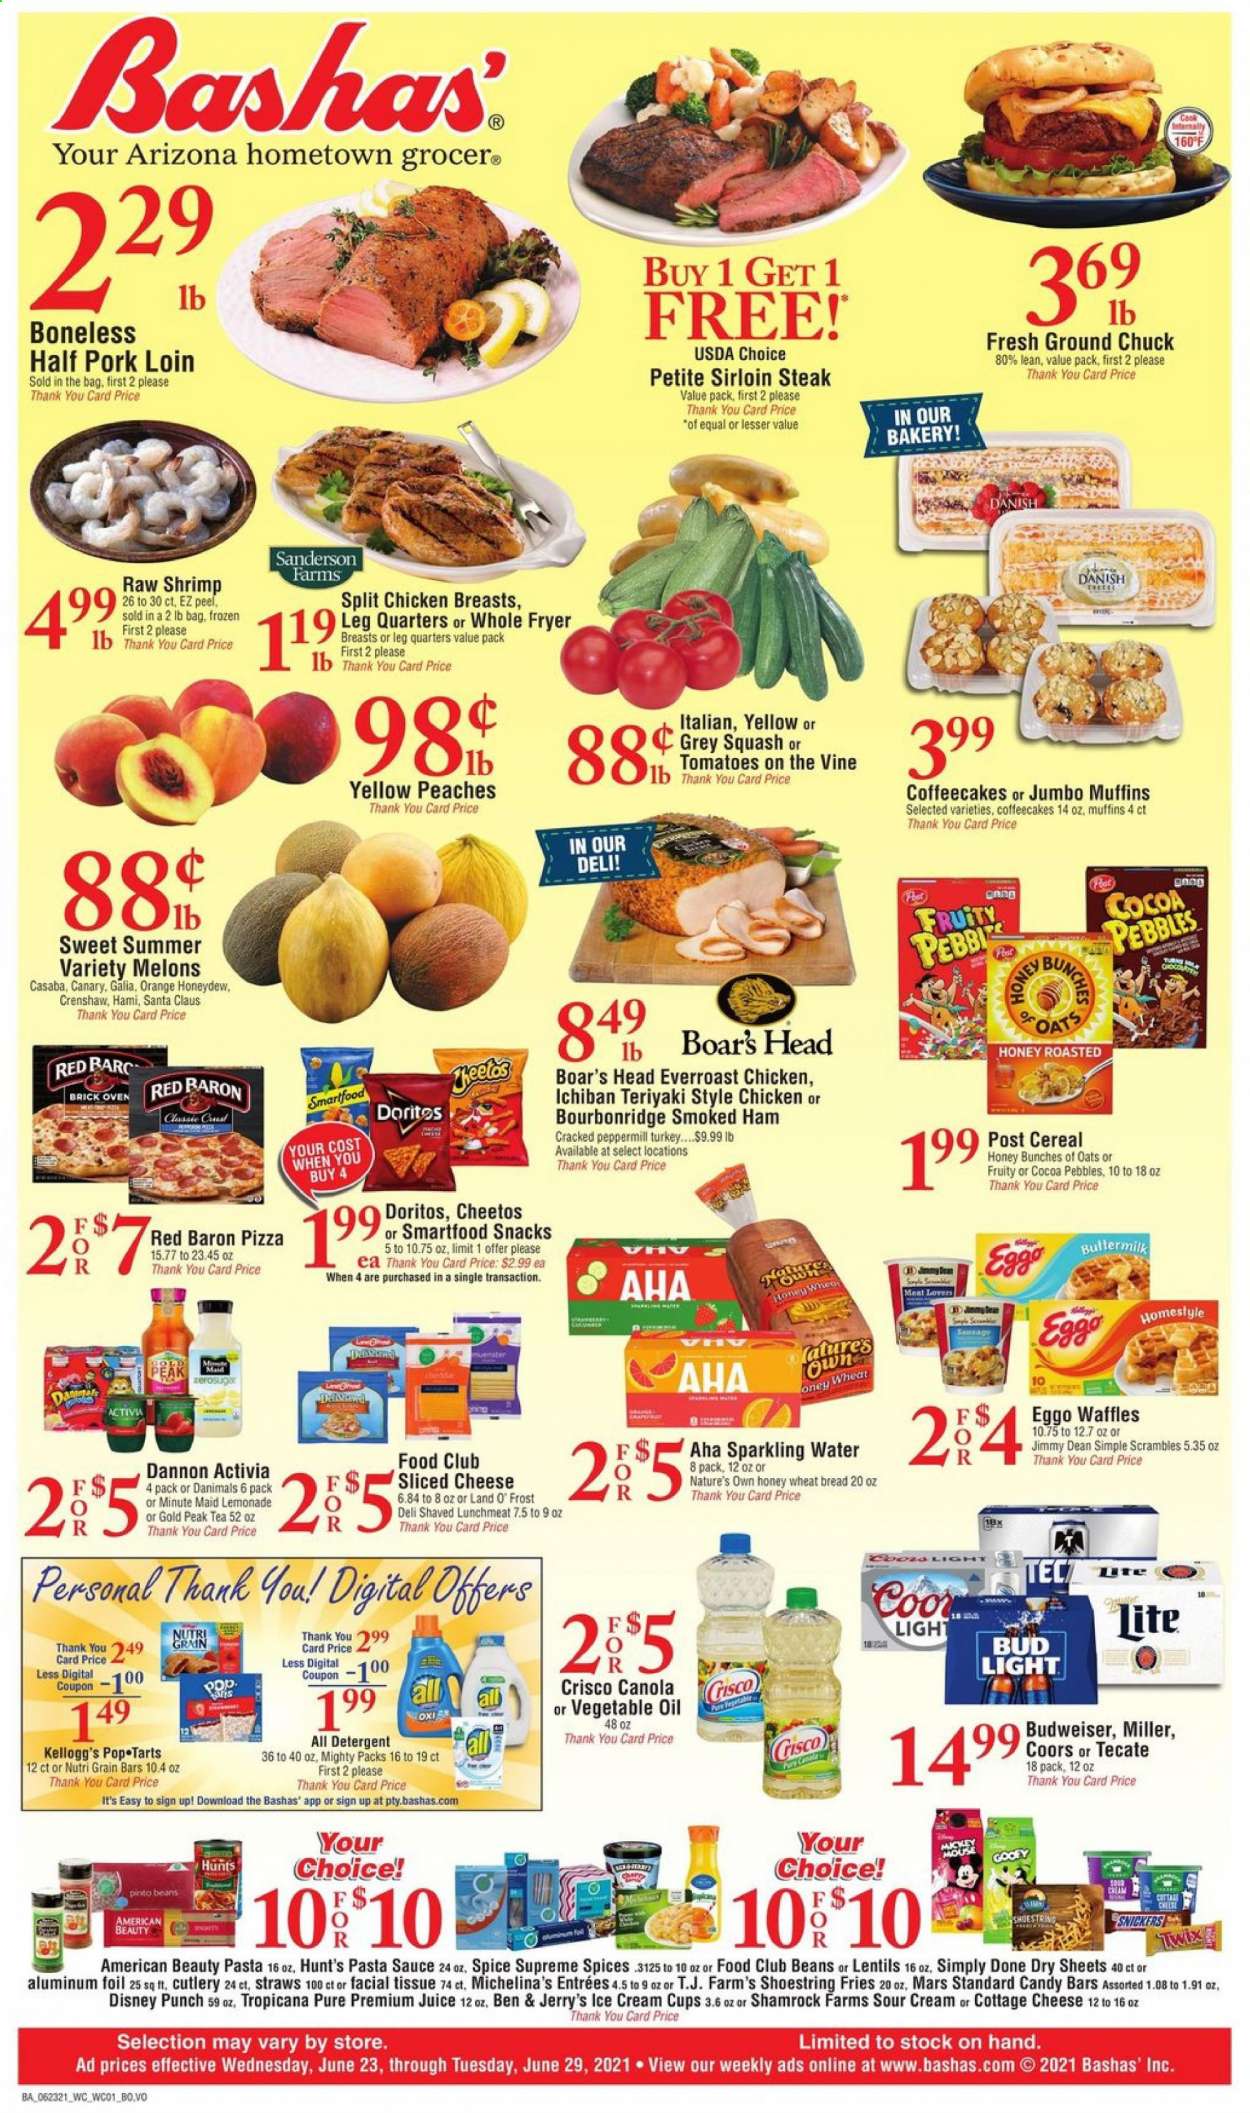 thumbnail - Bashas' Flyer - 06/23/2021 - 06/29/2021 - Sales products - wheat bread, muffin, waffles, coffee cake, beans, tomatoes, honeydew, oranges, shrimps, pizza, pasta sauce, sauce, Jimmy Dean, ham, smoked ham, lunch meat, cottage cheese, sliced cheese, Disney, Activia, Dannon, Danimals, buttermilk, eggs, sour cream, ice cream, Ben & Jerry's, potato fries, Red Baron, snack, Snickers, Twix, Mars, Kellogg's, Santa, Pop-Tarts, Doritos, Cheetos, Smartfood, Crisco, lentils, pinto beans, cereals, Nutri-Grain, spice, lemonade, juice, Gold Peak Tea, fruit punch, sparkling water, tea, beer, Budweiser, Coors, Bud Light, Miller, chicken breasts, beef sirloin, ground chuck, steak, sirloin steak, pork loin, pork meat, tissues, detergent, bunches, Nature's Own, melons, peaches. Page 1.